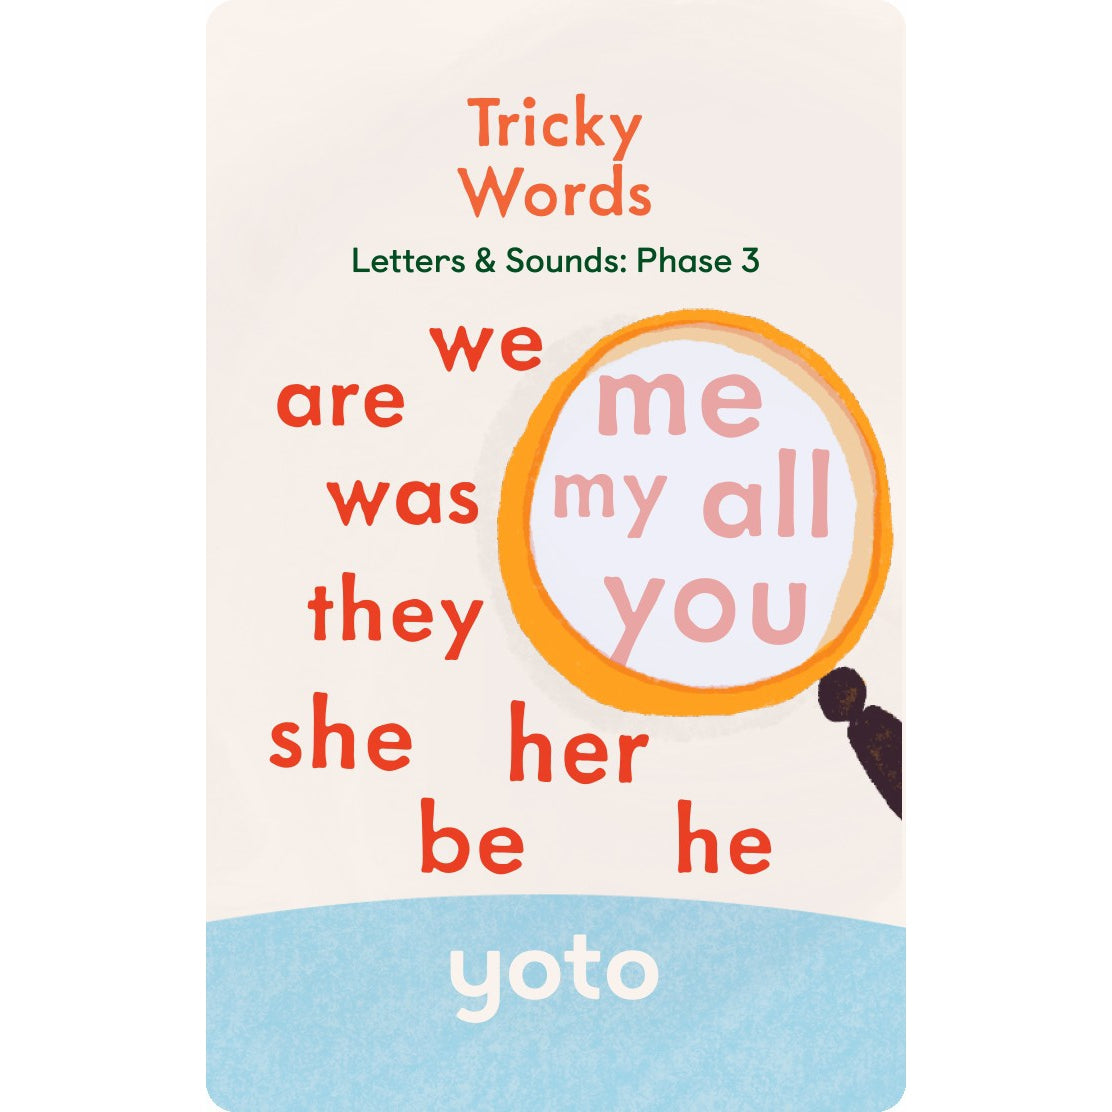 Yoto Cards - Phonics Letters and Sounds - Phase 3 - Cards for Yoto Audio Player